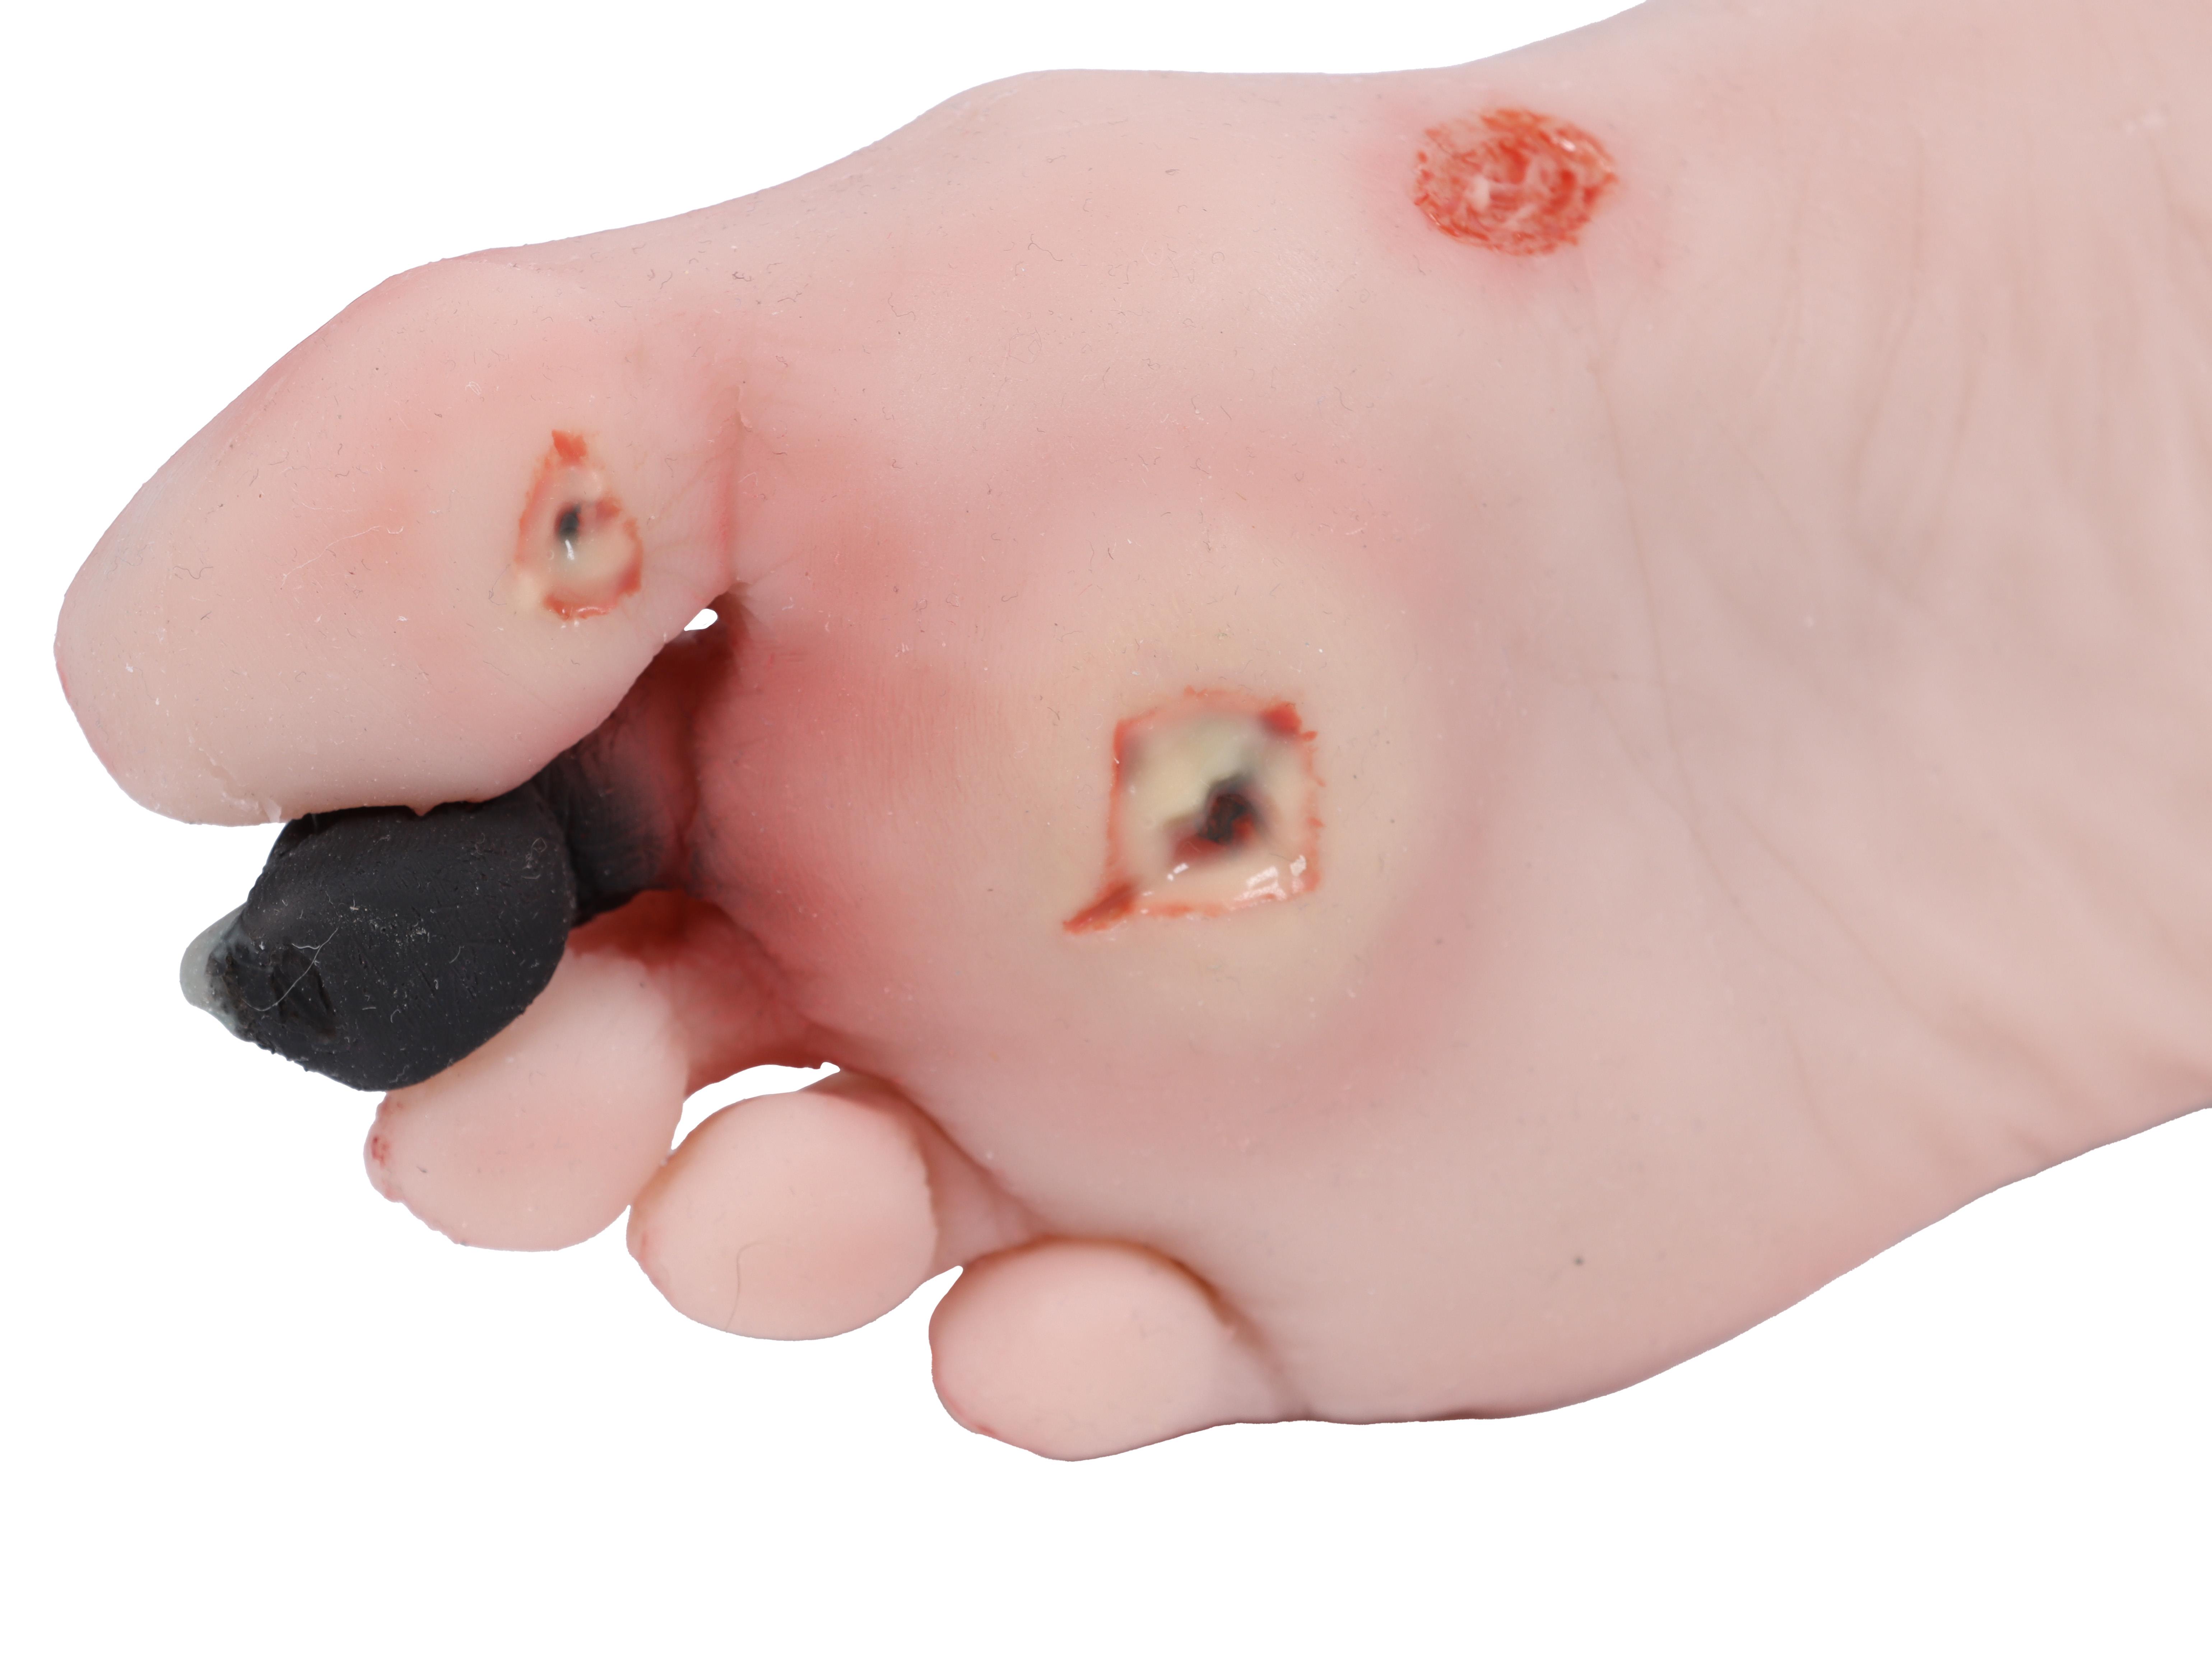 Wound-foot-with-diabetic-foot-syndrome-5